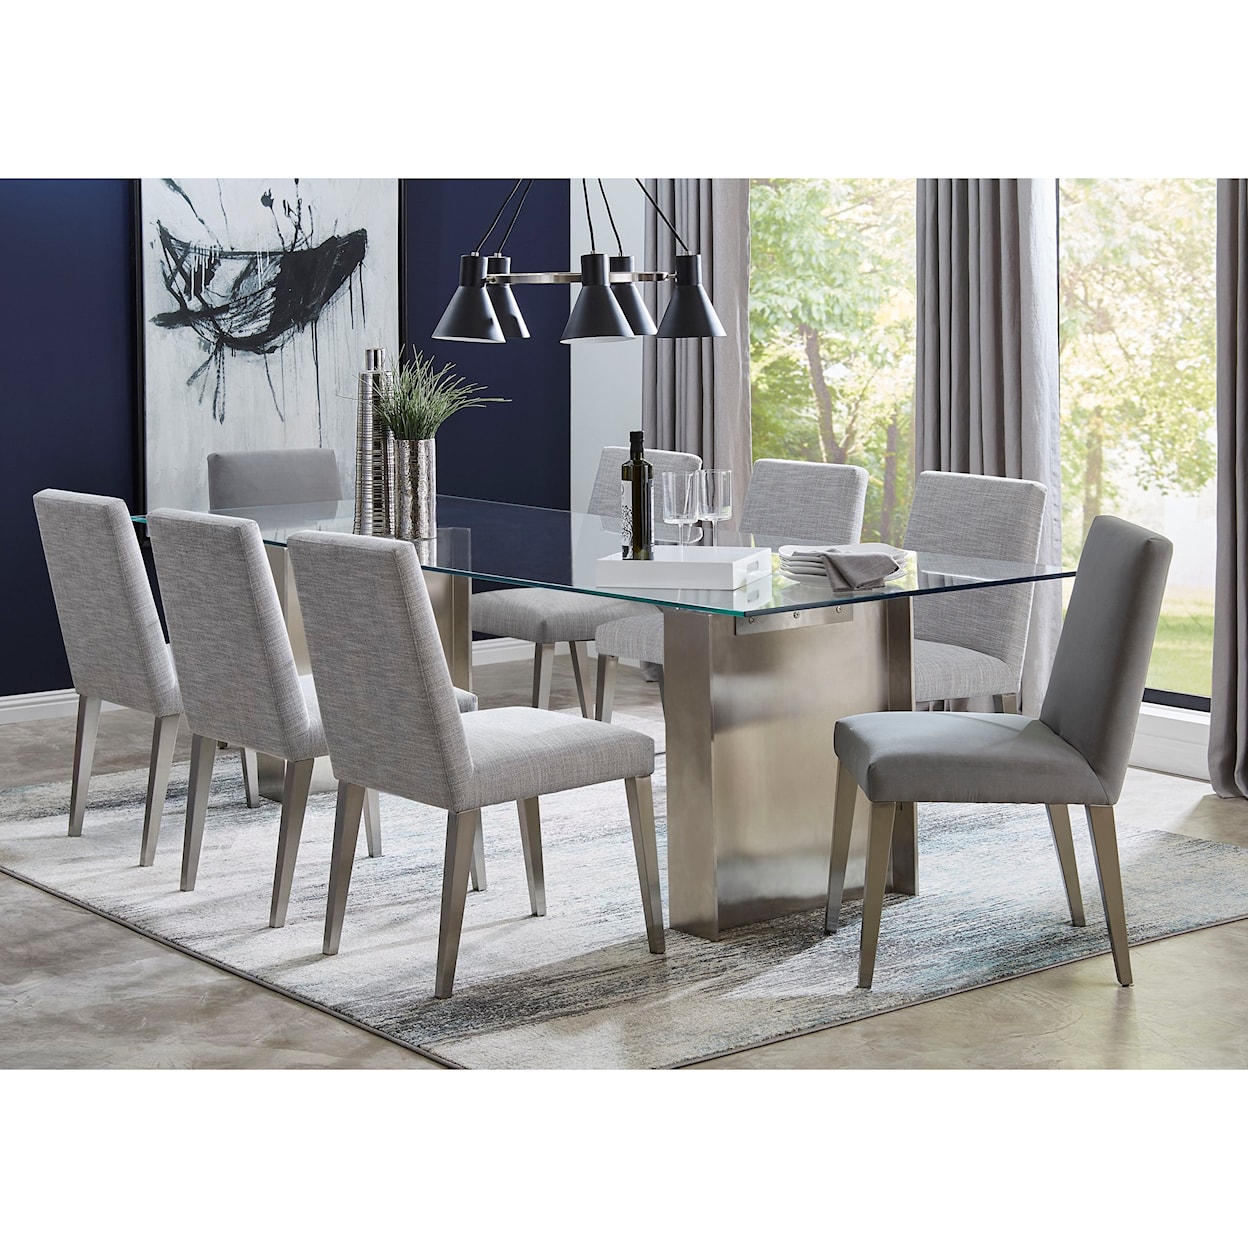 Modus International Omnia Chair - Silver/Brushed Stainless Steel